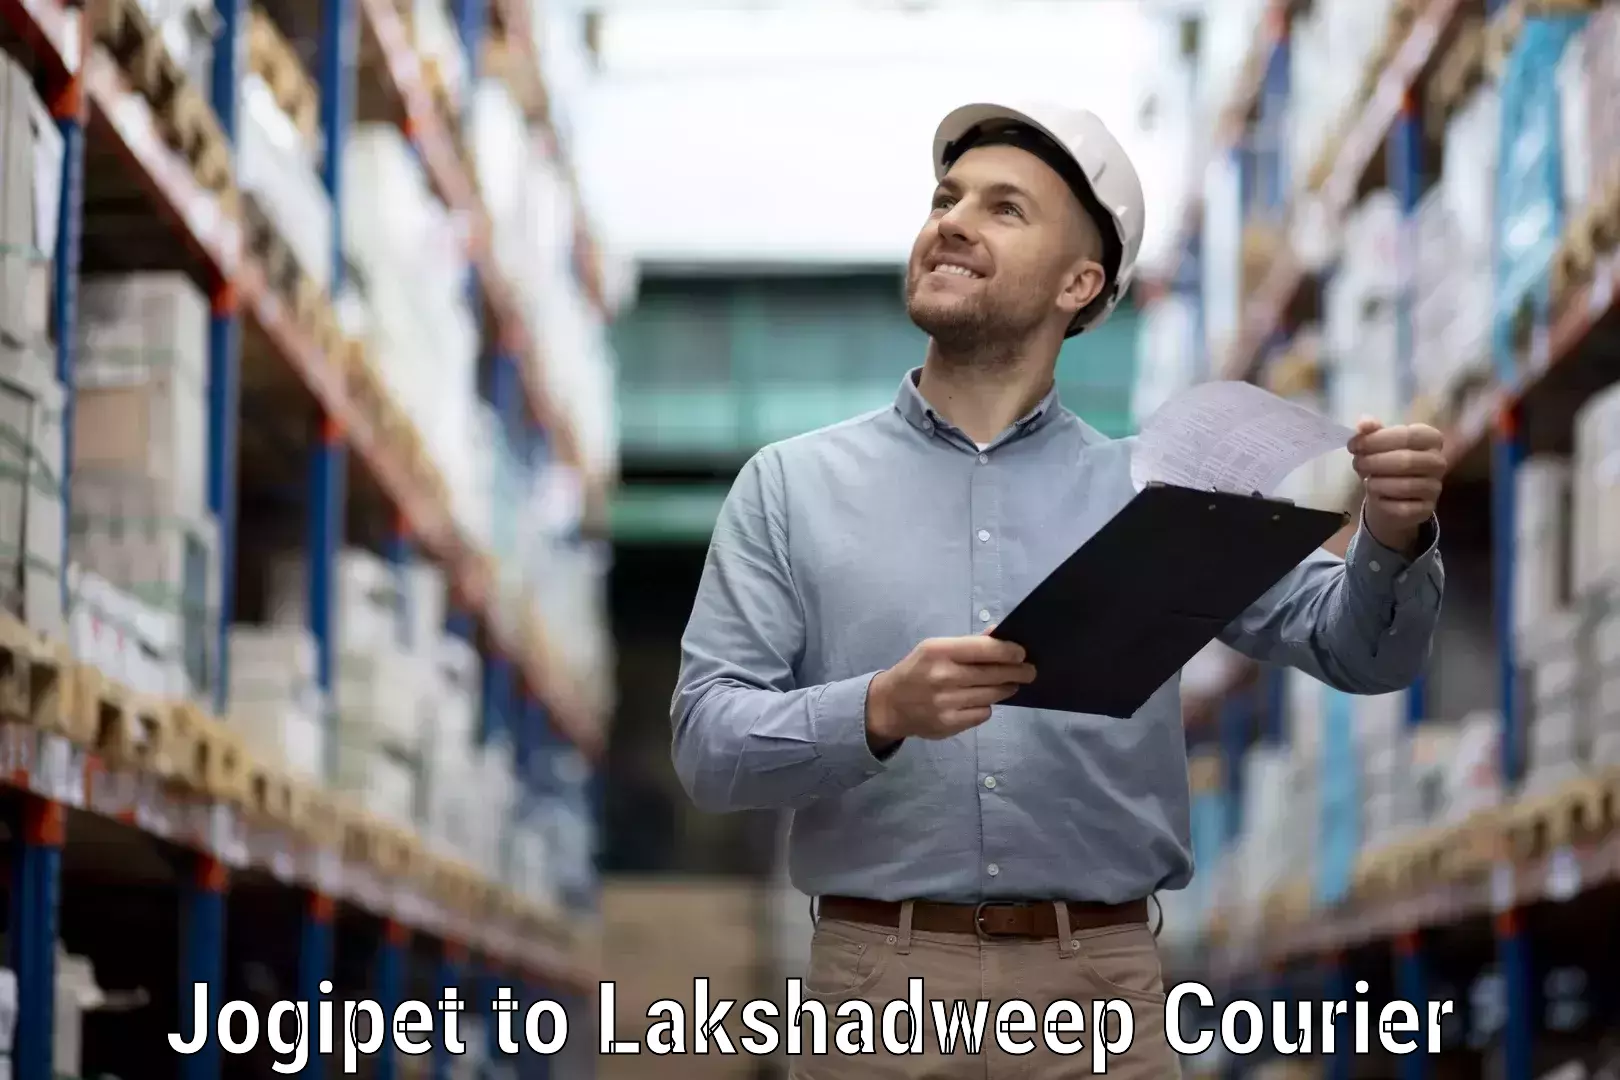 Advanced courier platforms Jogipet to Lakshadweep